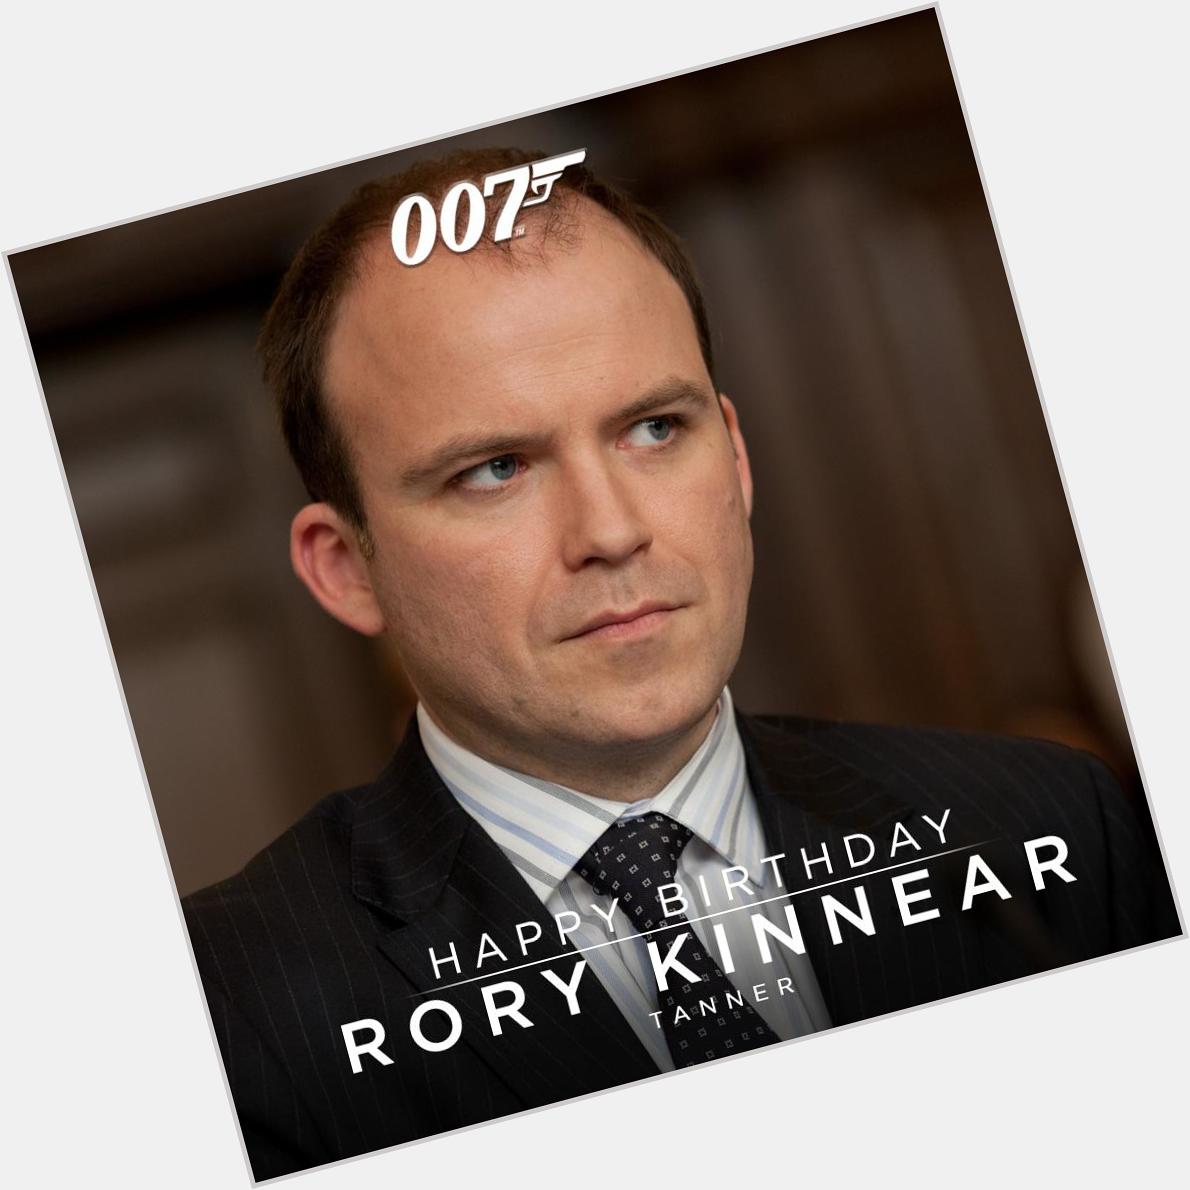 \" A Happy Birthday to Rory Kinnear who plays MI6 s Bill Tanner he returns this year in SPECTRE. 